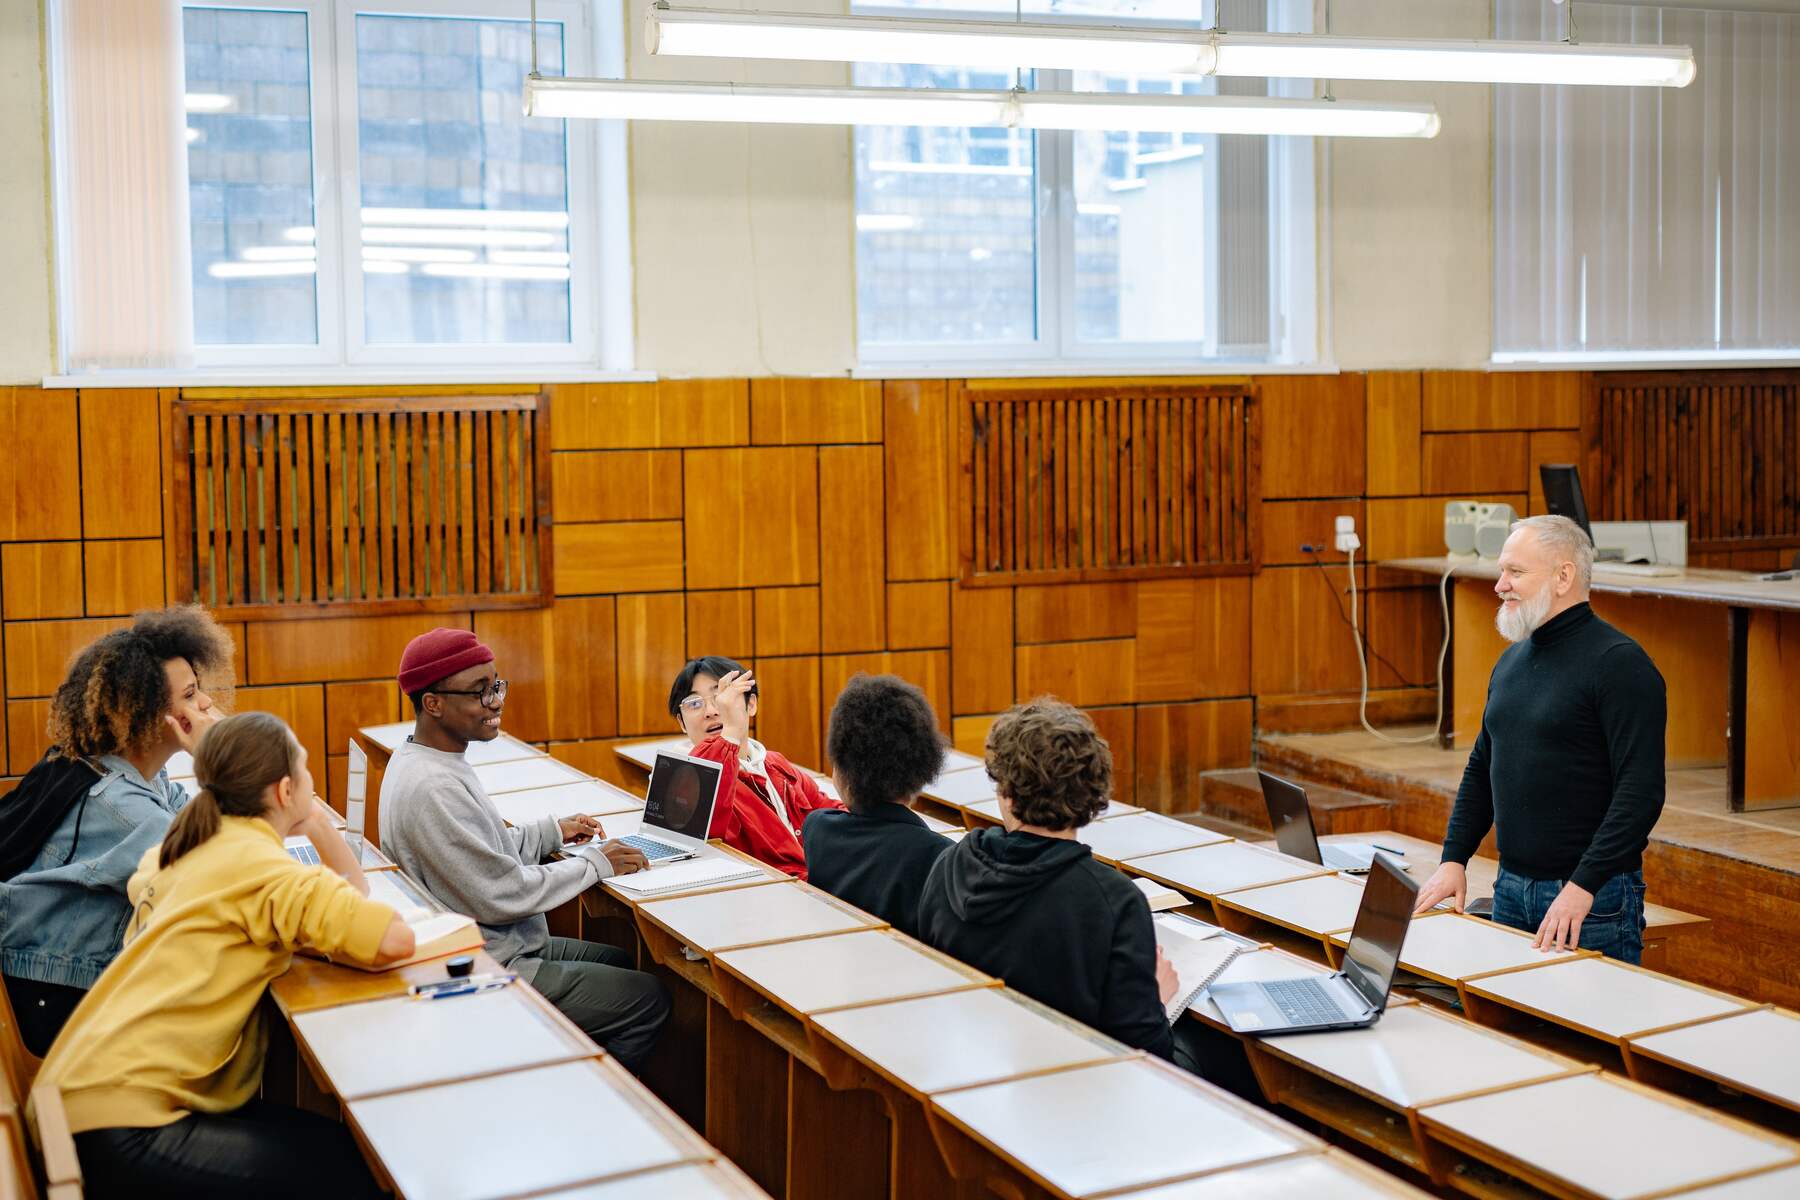 Students sitting in a classroom with a professor standing at the front of the room